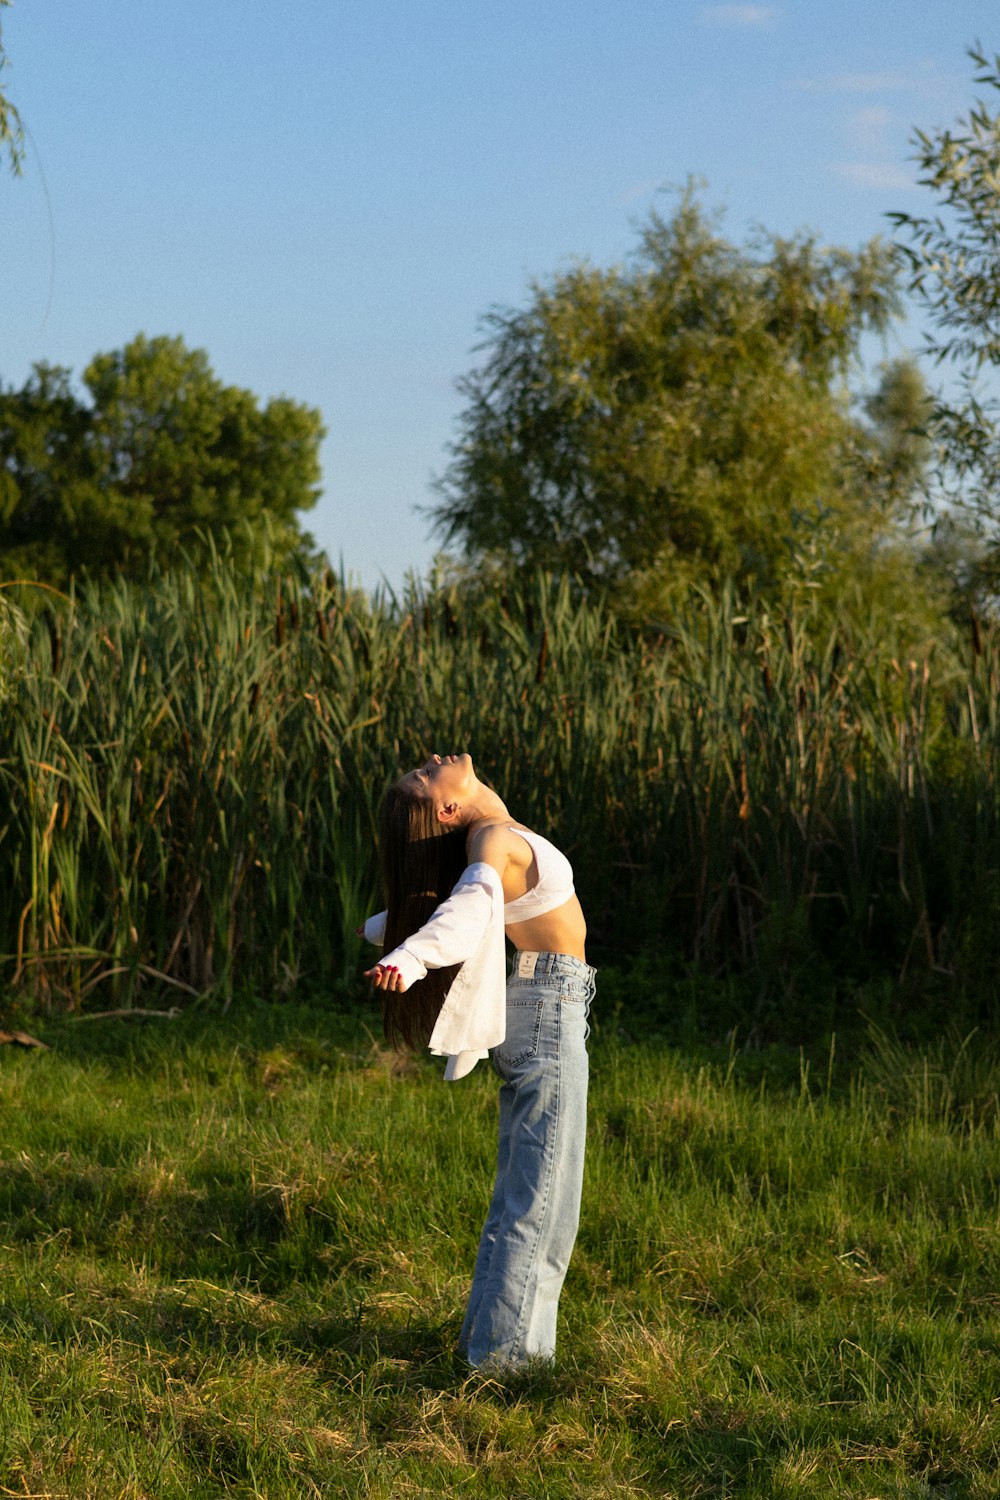 a woman standing in a field holding a frisbee